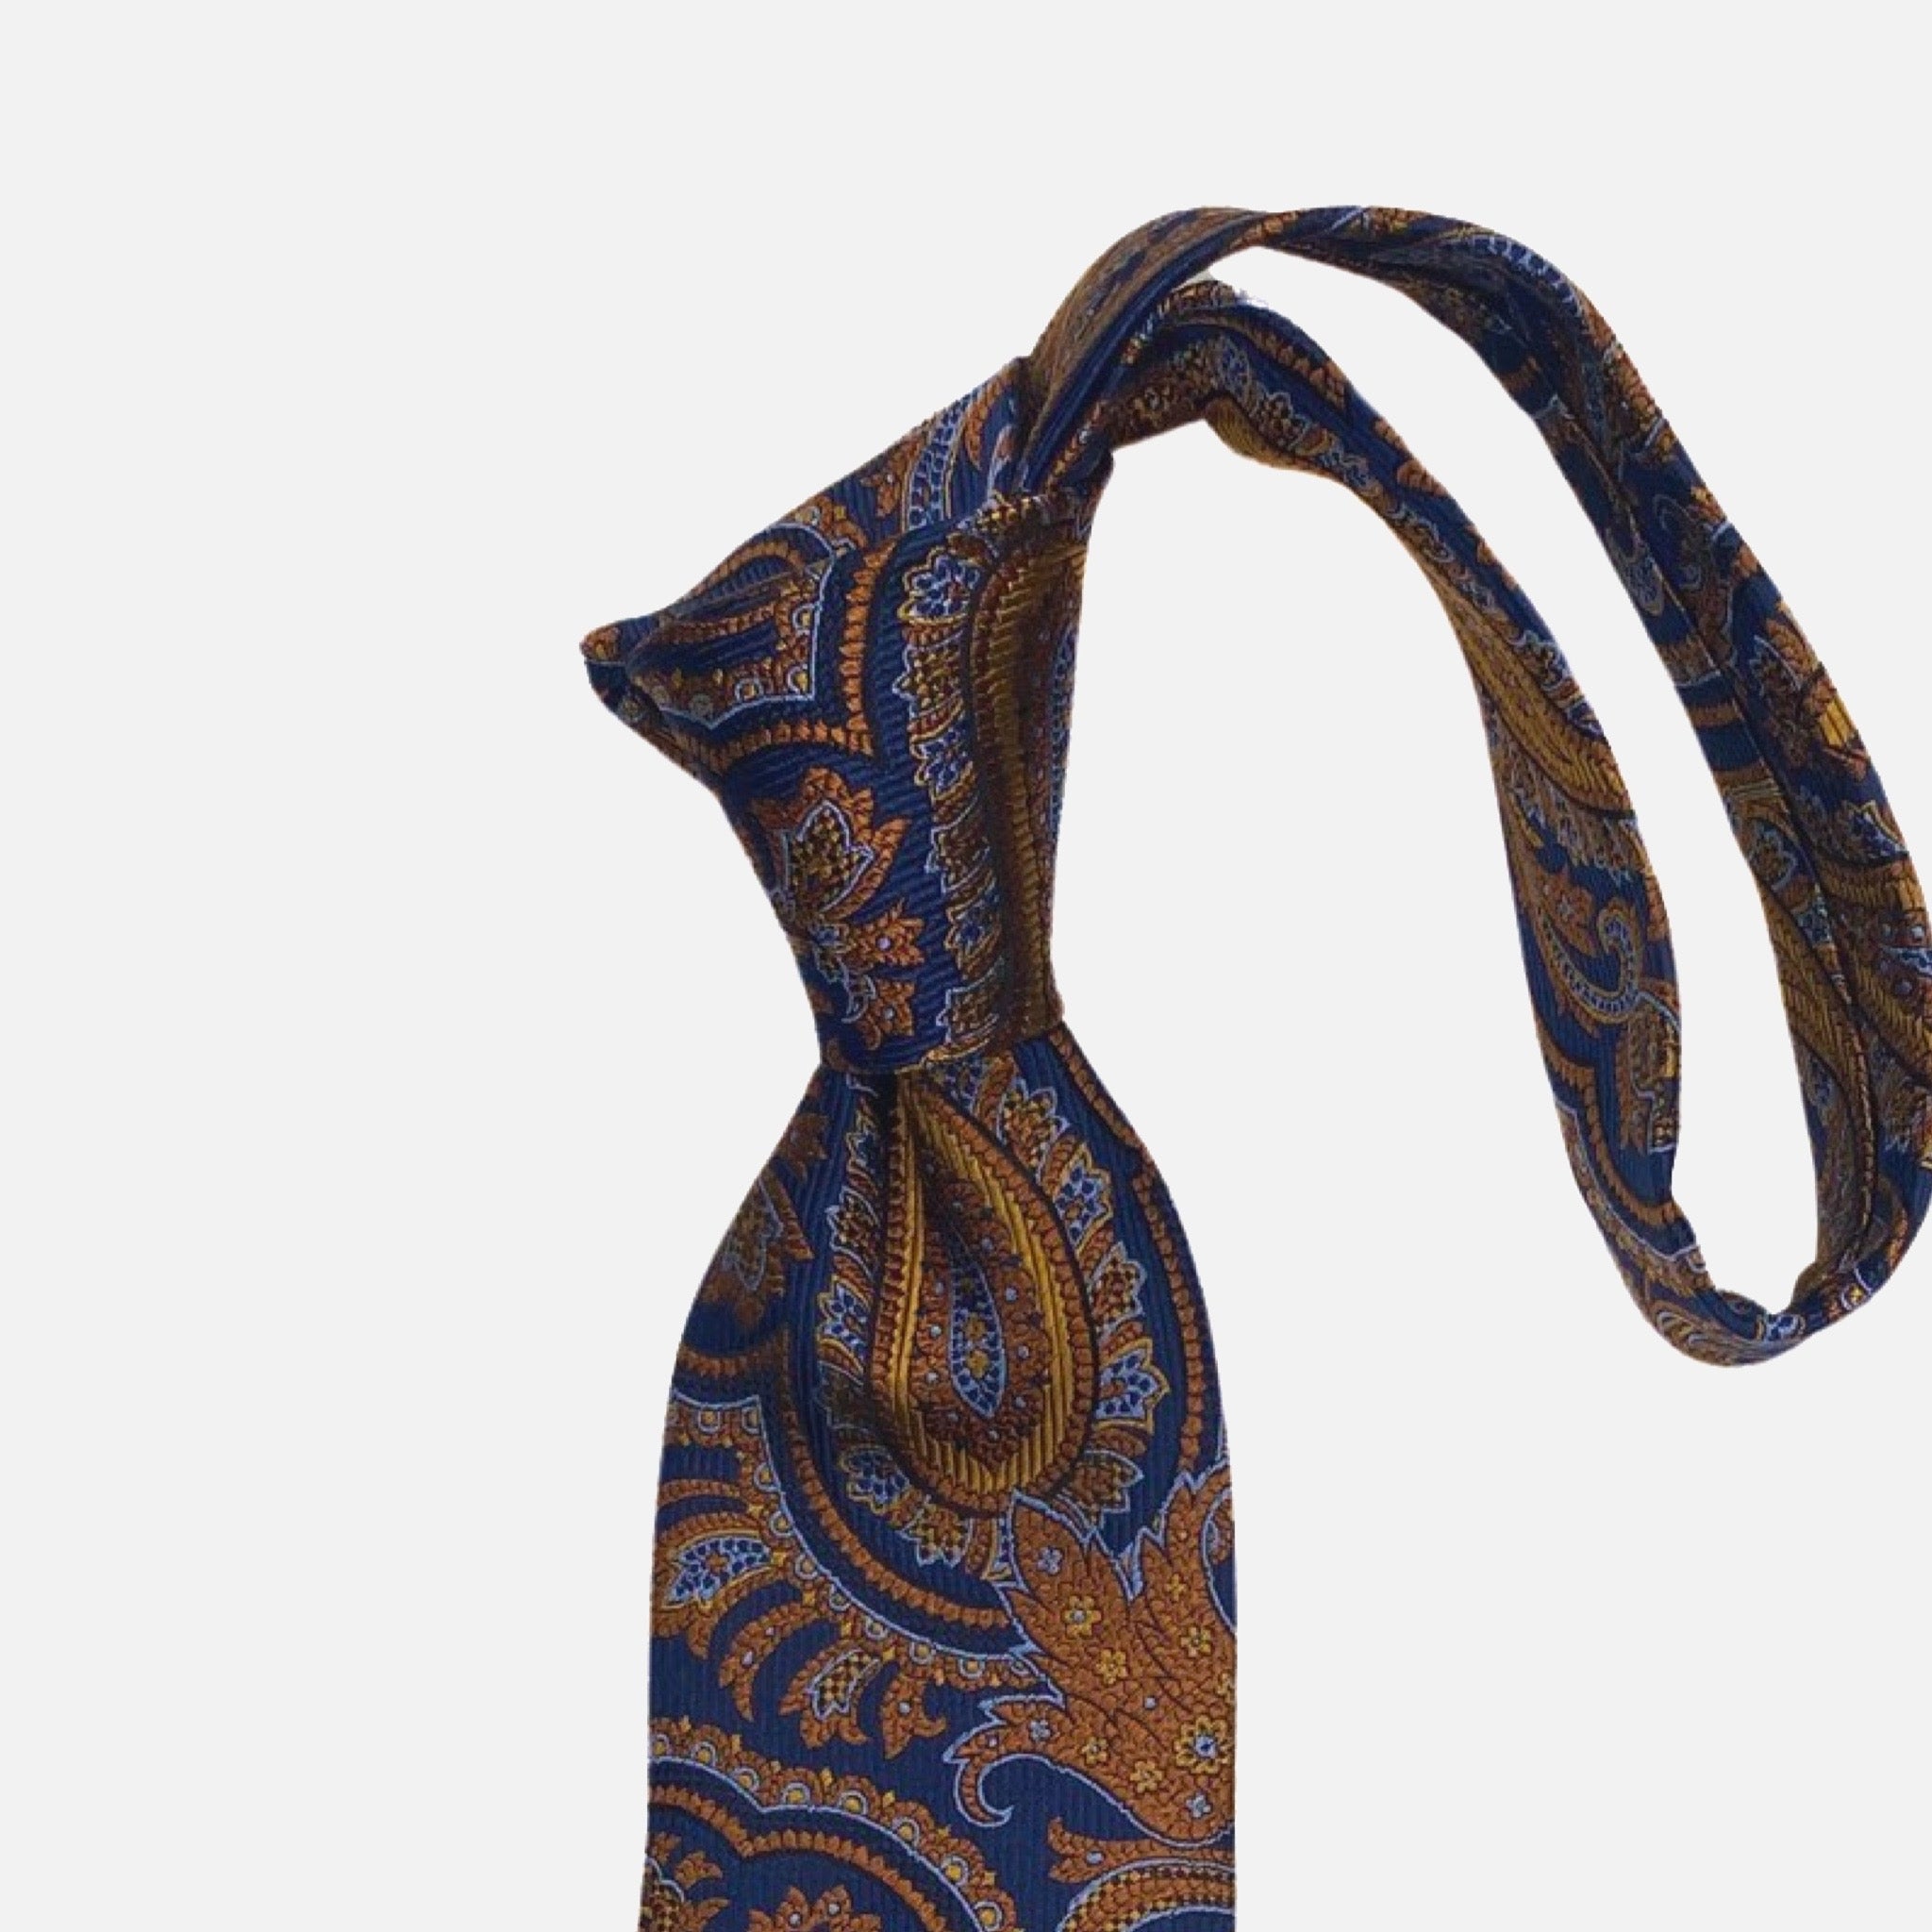 JZ Richards Navy Blue Woven Silk Paisley Tie -  Handcrafted in the USA